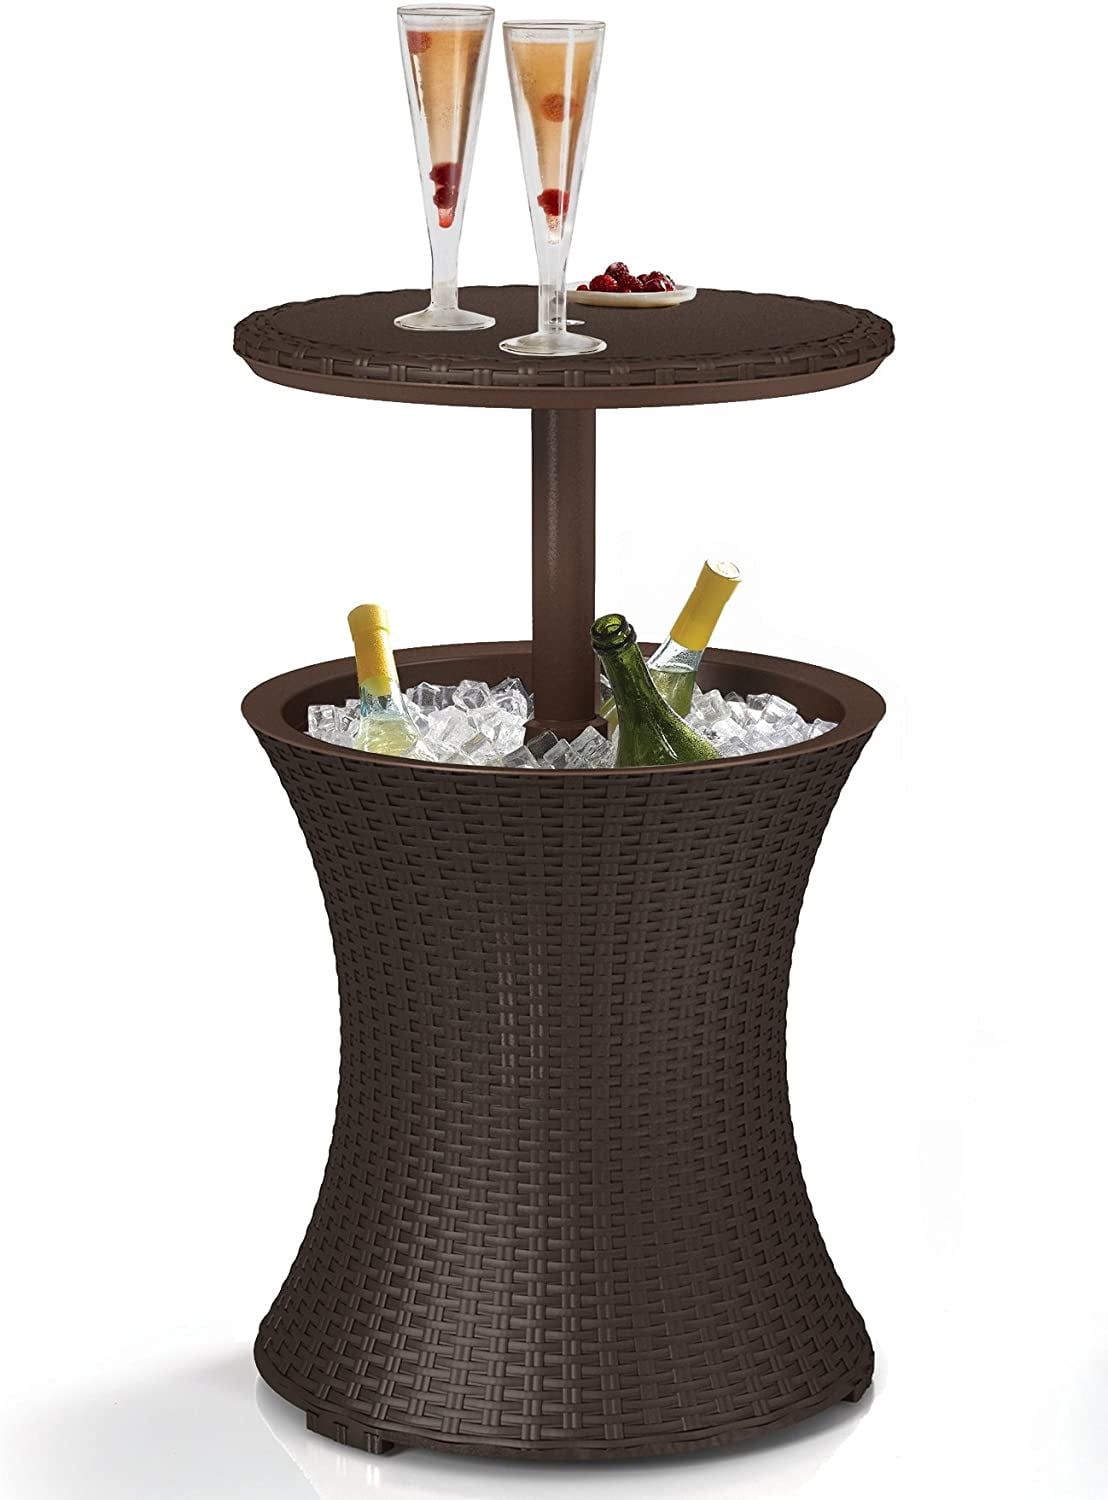 Keter Pacific Cool Bar Outdoor Patio, Outdoor Rated Wine Coolers